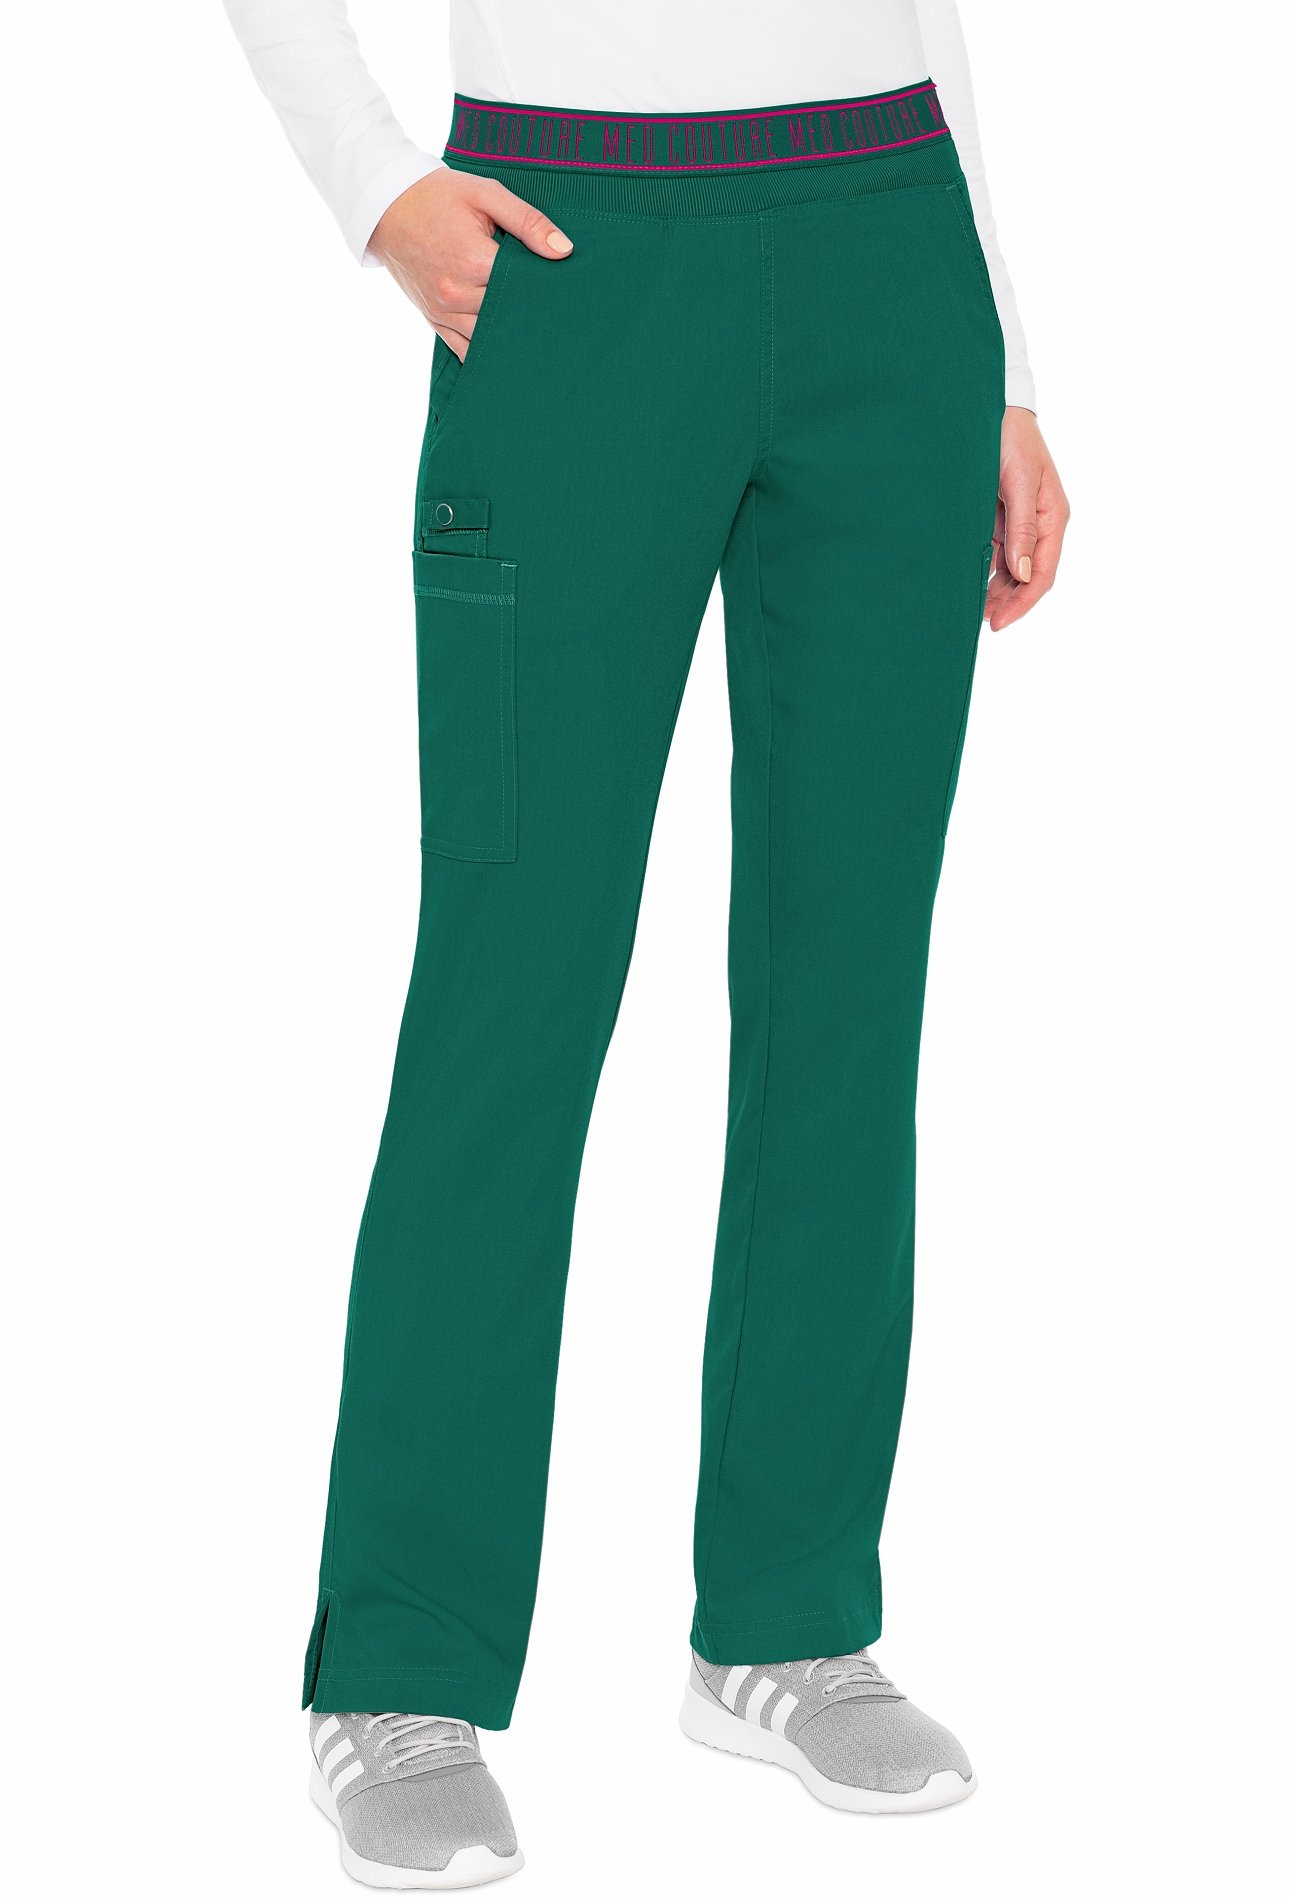 Med Couture Touch Women's Yoga Cargo Ally Pant-MC7739